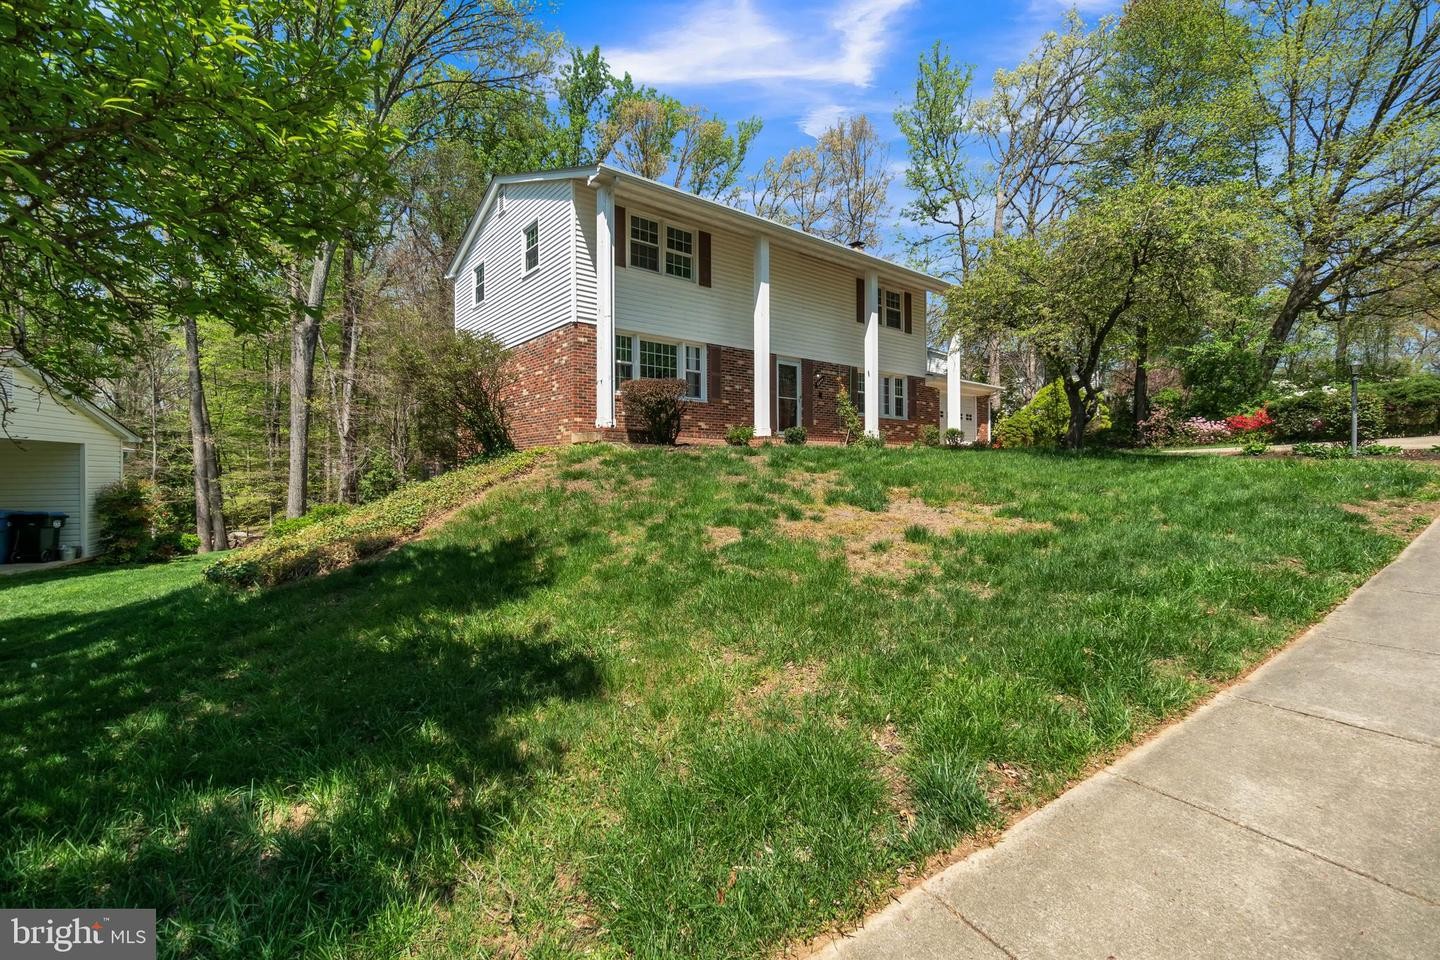 4. 6944 Cottontail Ct